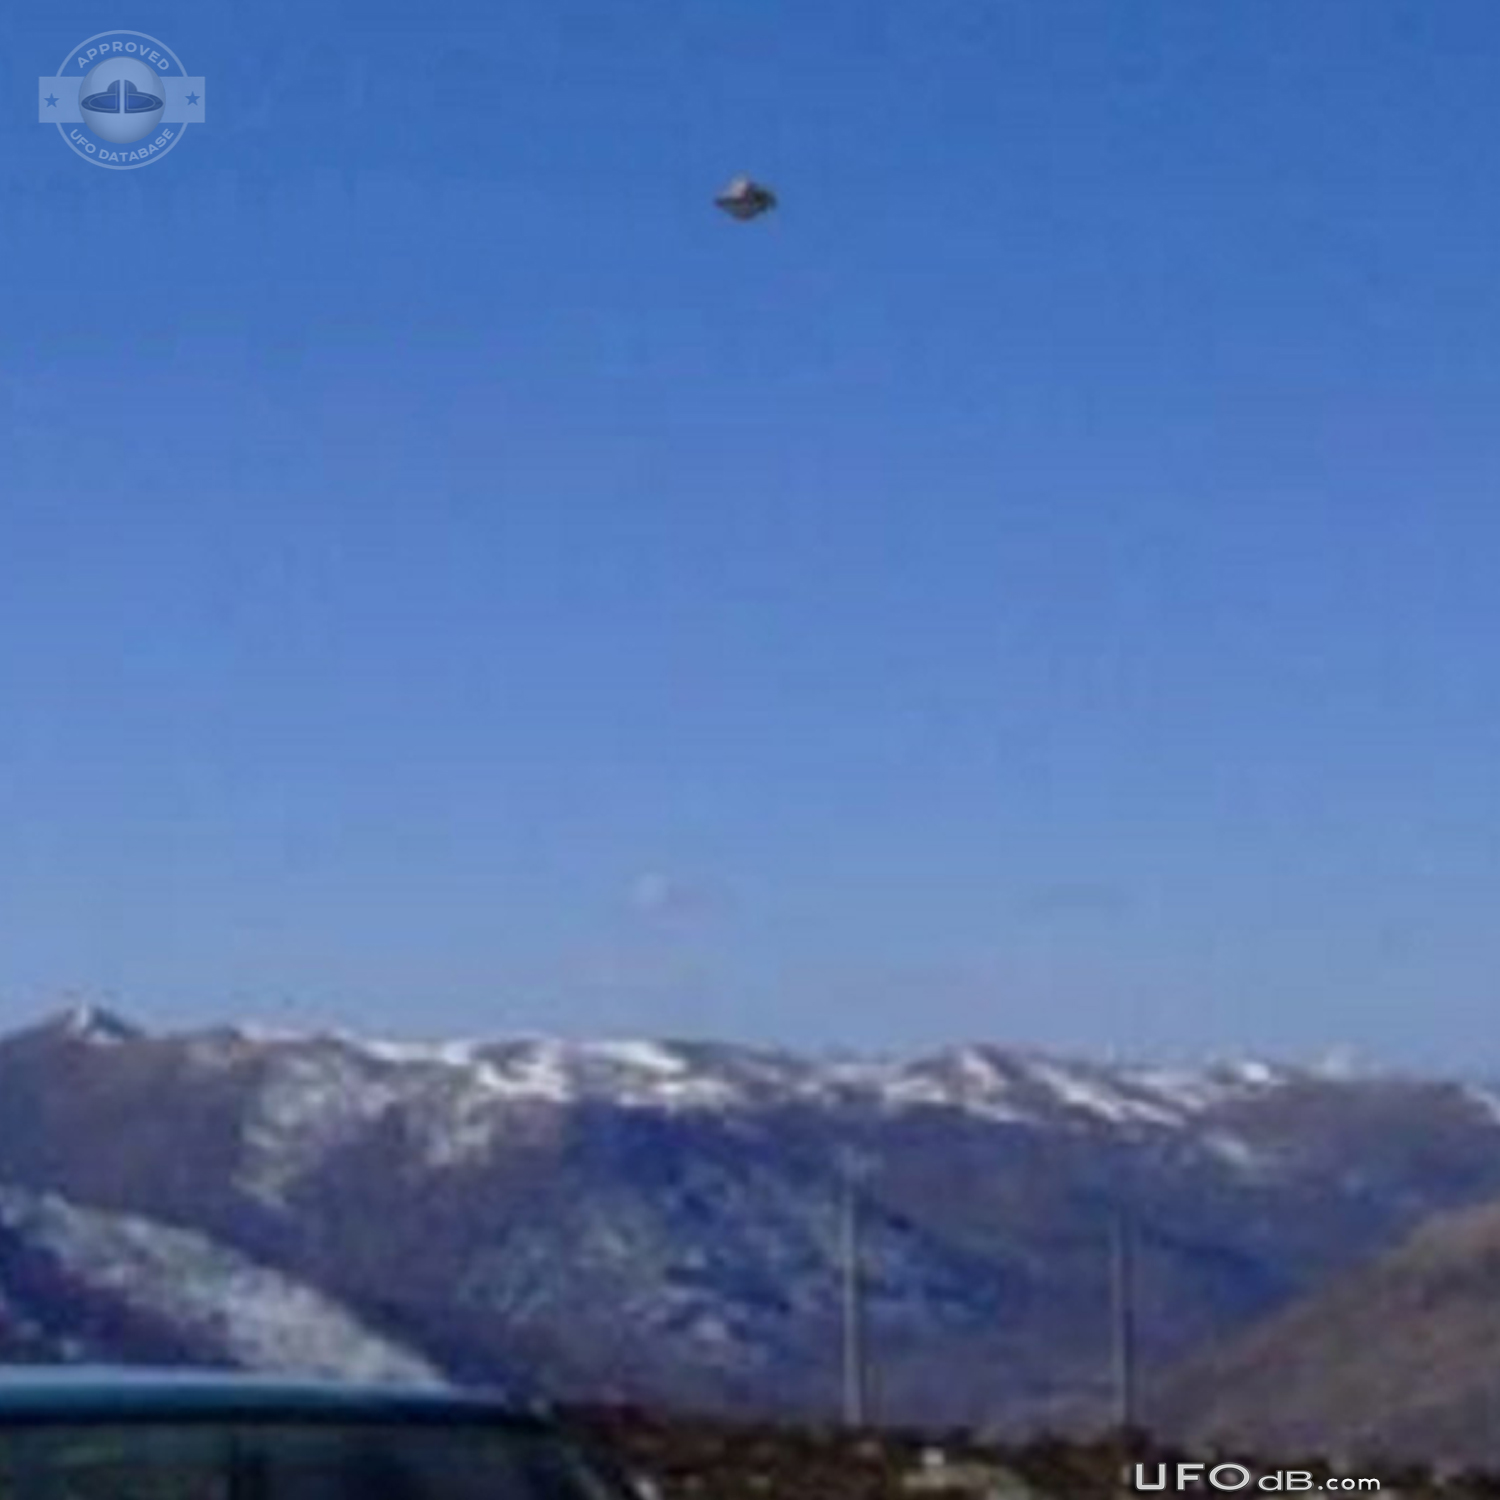 A UFO is photograph in the Icy mountains of Tibet, China February 2011 UFO Picture #251-3